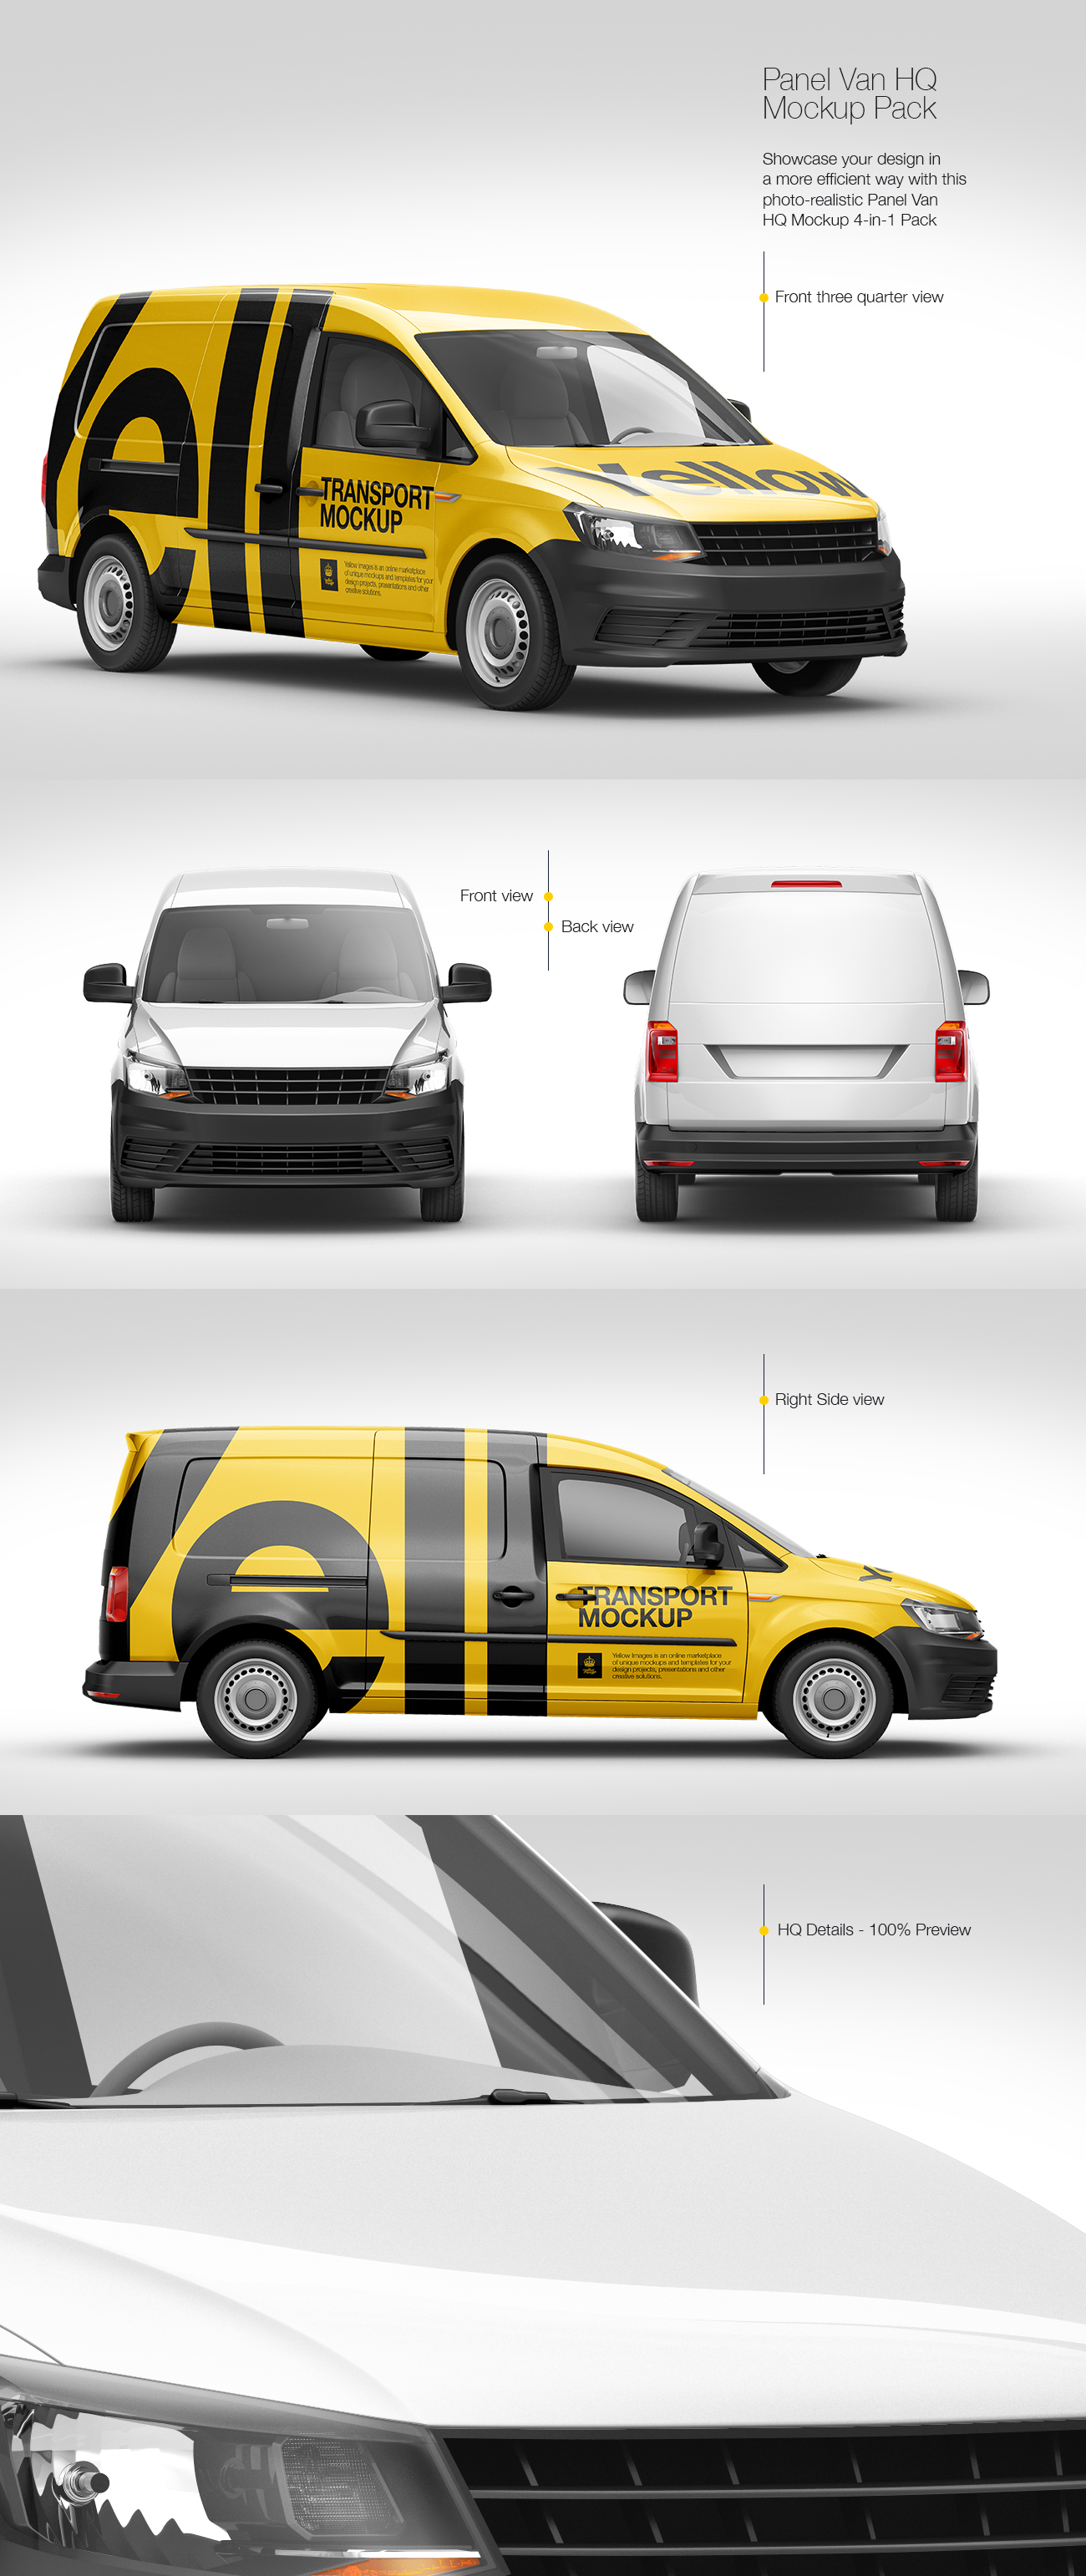 Download Panel Van HQ Mockup Pack in Vehicle Mockups on Yellow Images Creative Store